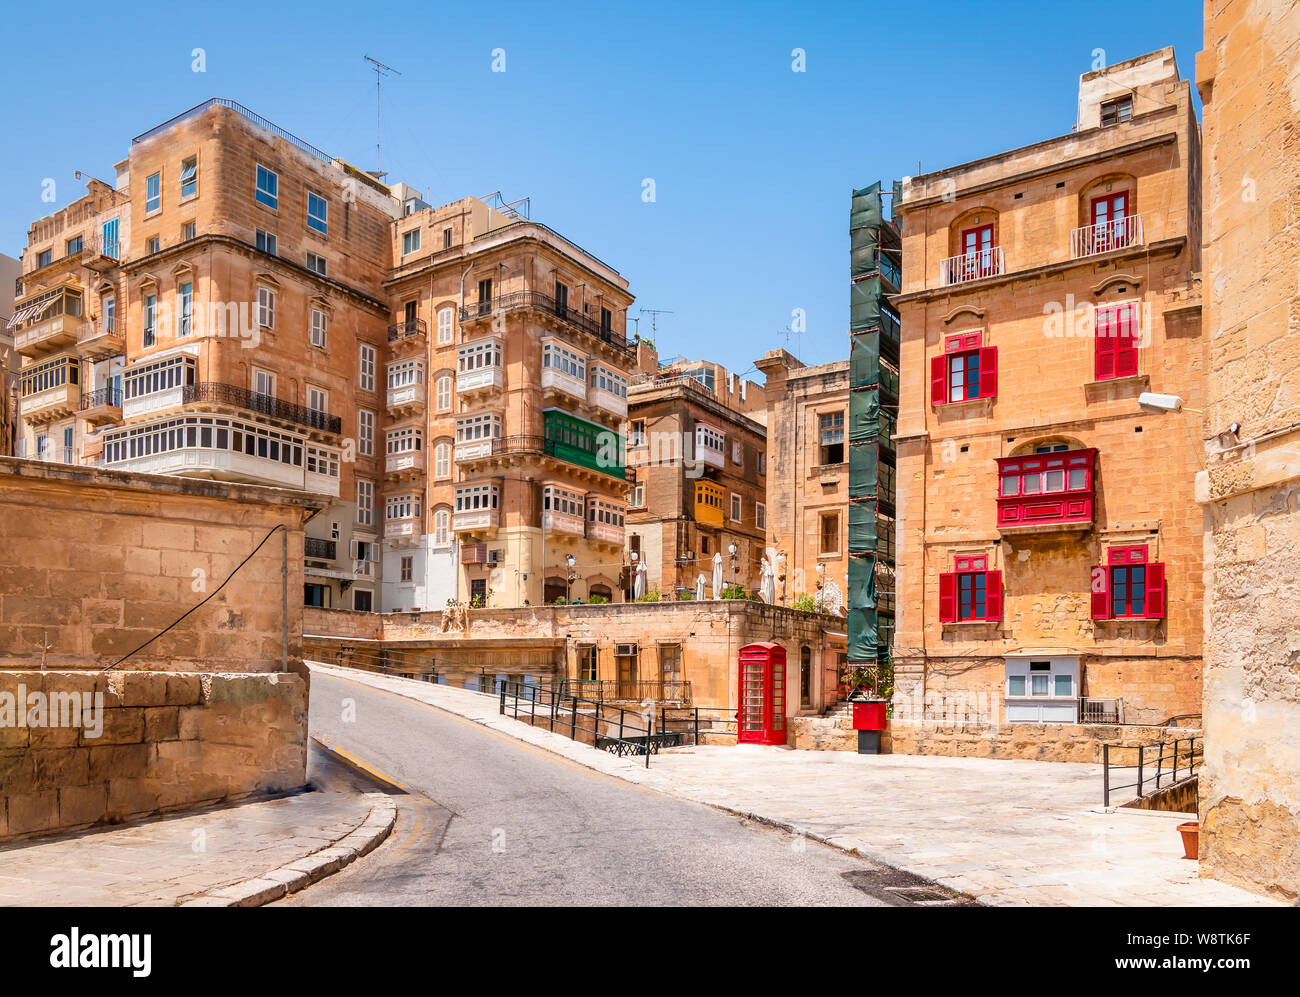 Historic city centre of Valletta, Malta. Beautiful architecture with traditional balconies. Stock Photo